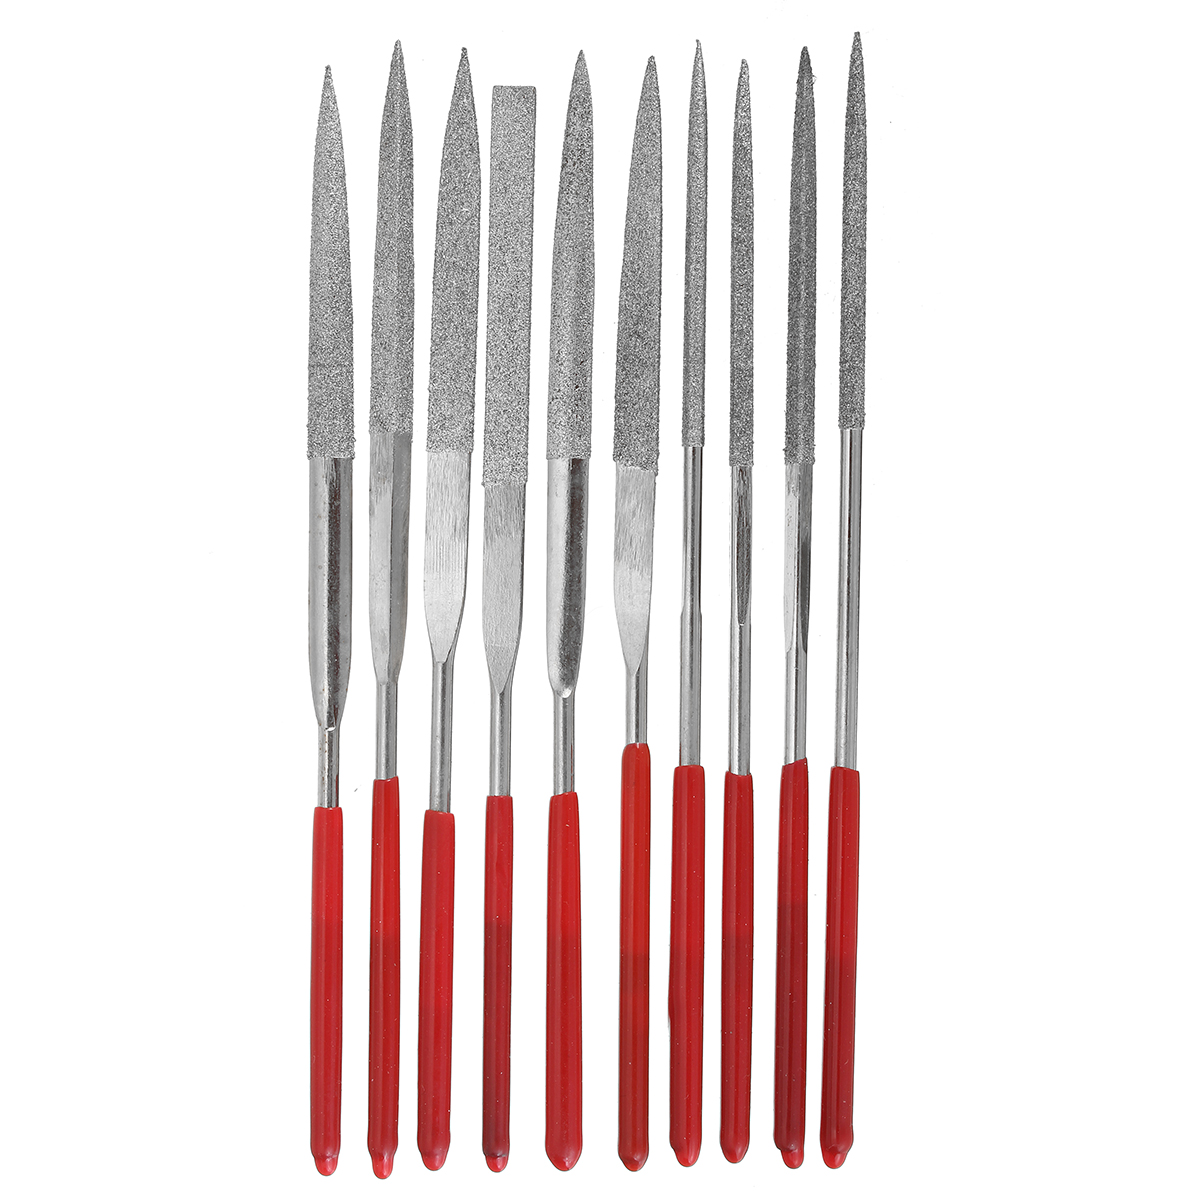 Find 13Pcs Diamond Files Suit Carpenter's Woodworking Househould Hand Tools for Sale on Gipsybee.com with cryptocurrencies